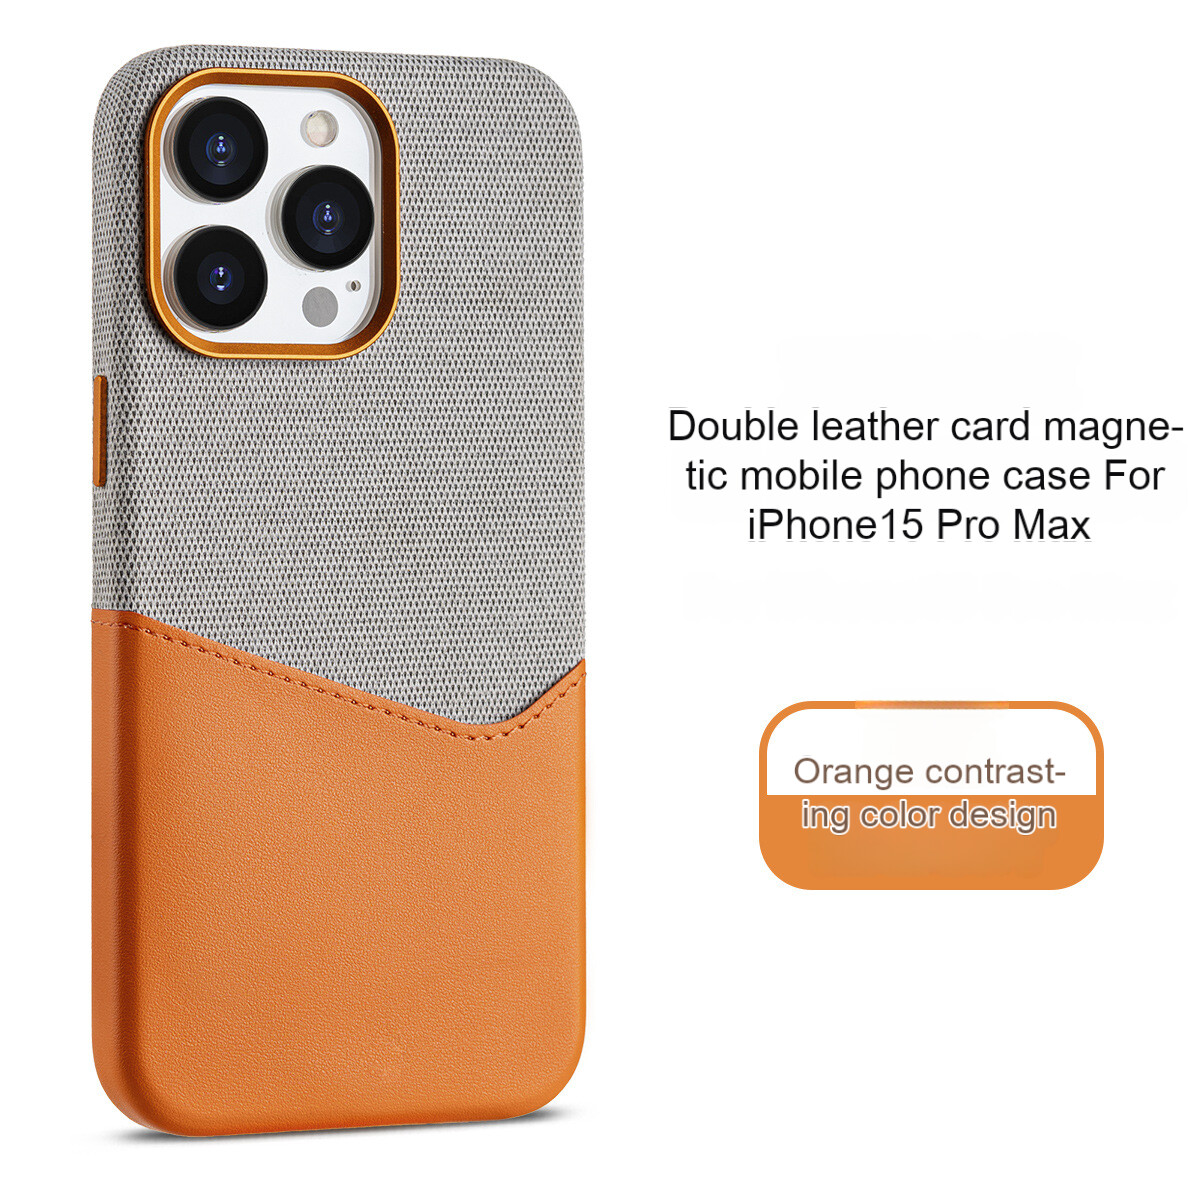 New Leather Magnetic Suction Dual Color Combination All-inclusive Protective iPhone Case, Color: Orange [strong magnetic suction + dual card], Models: iPhone15promax